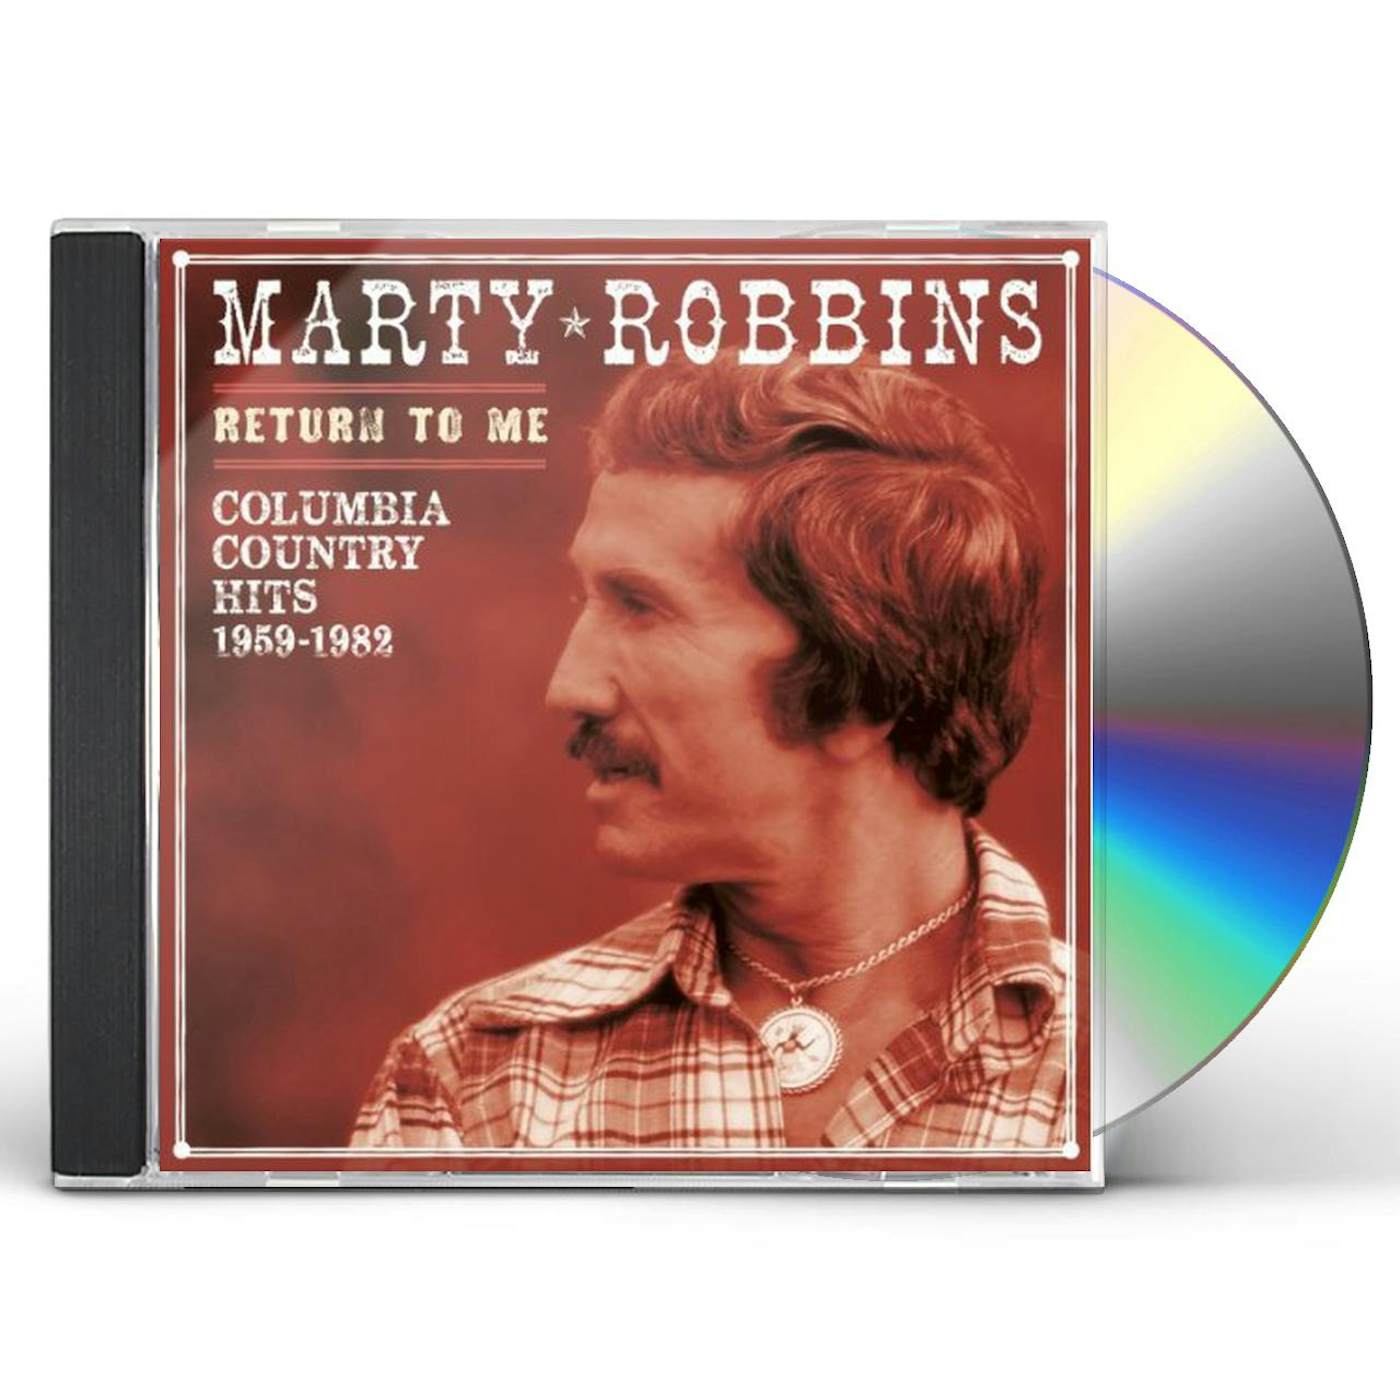 Marty Robbins RETURN TO ME: COLUMBIA COUNTRY HITS 1959-82 CD